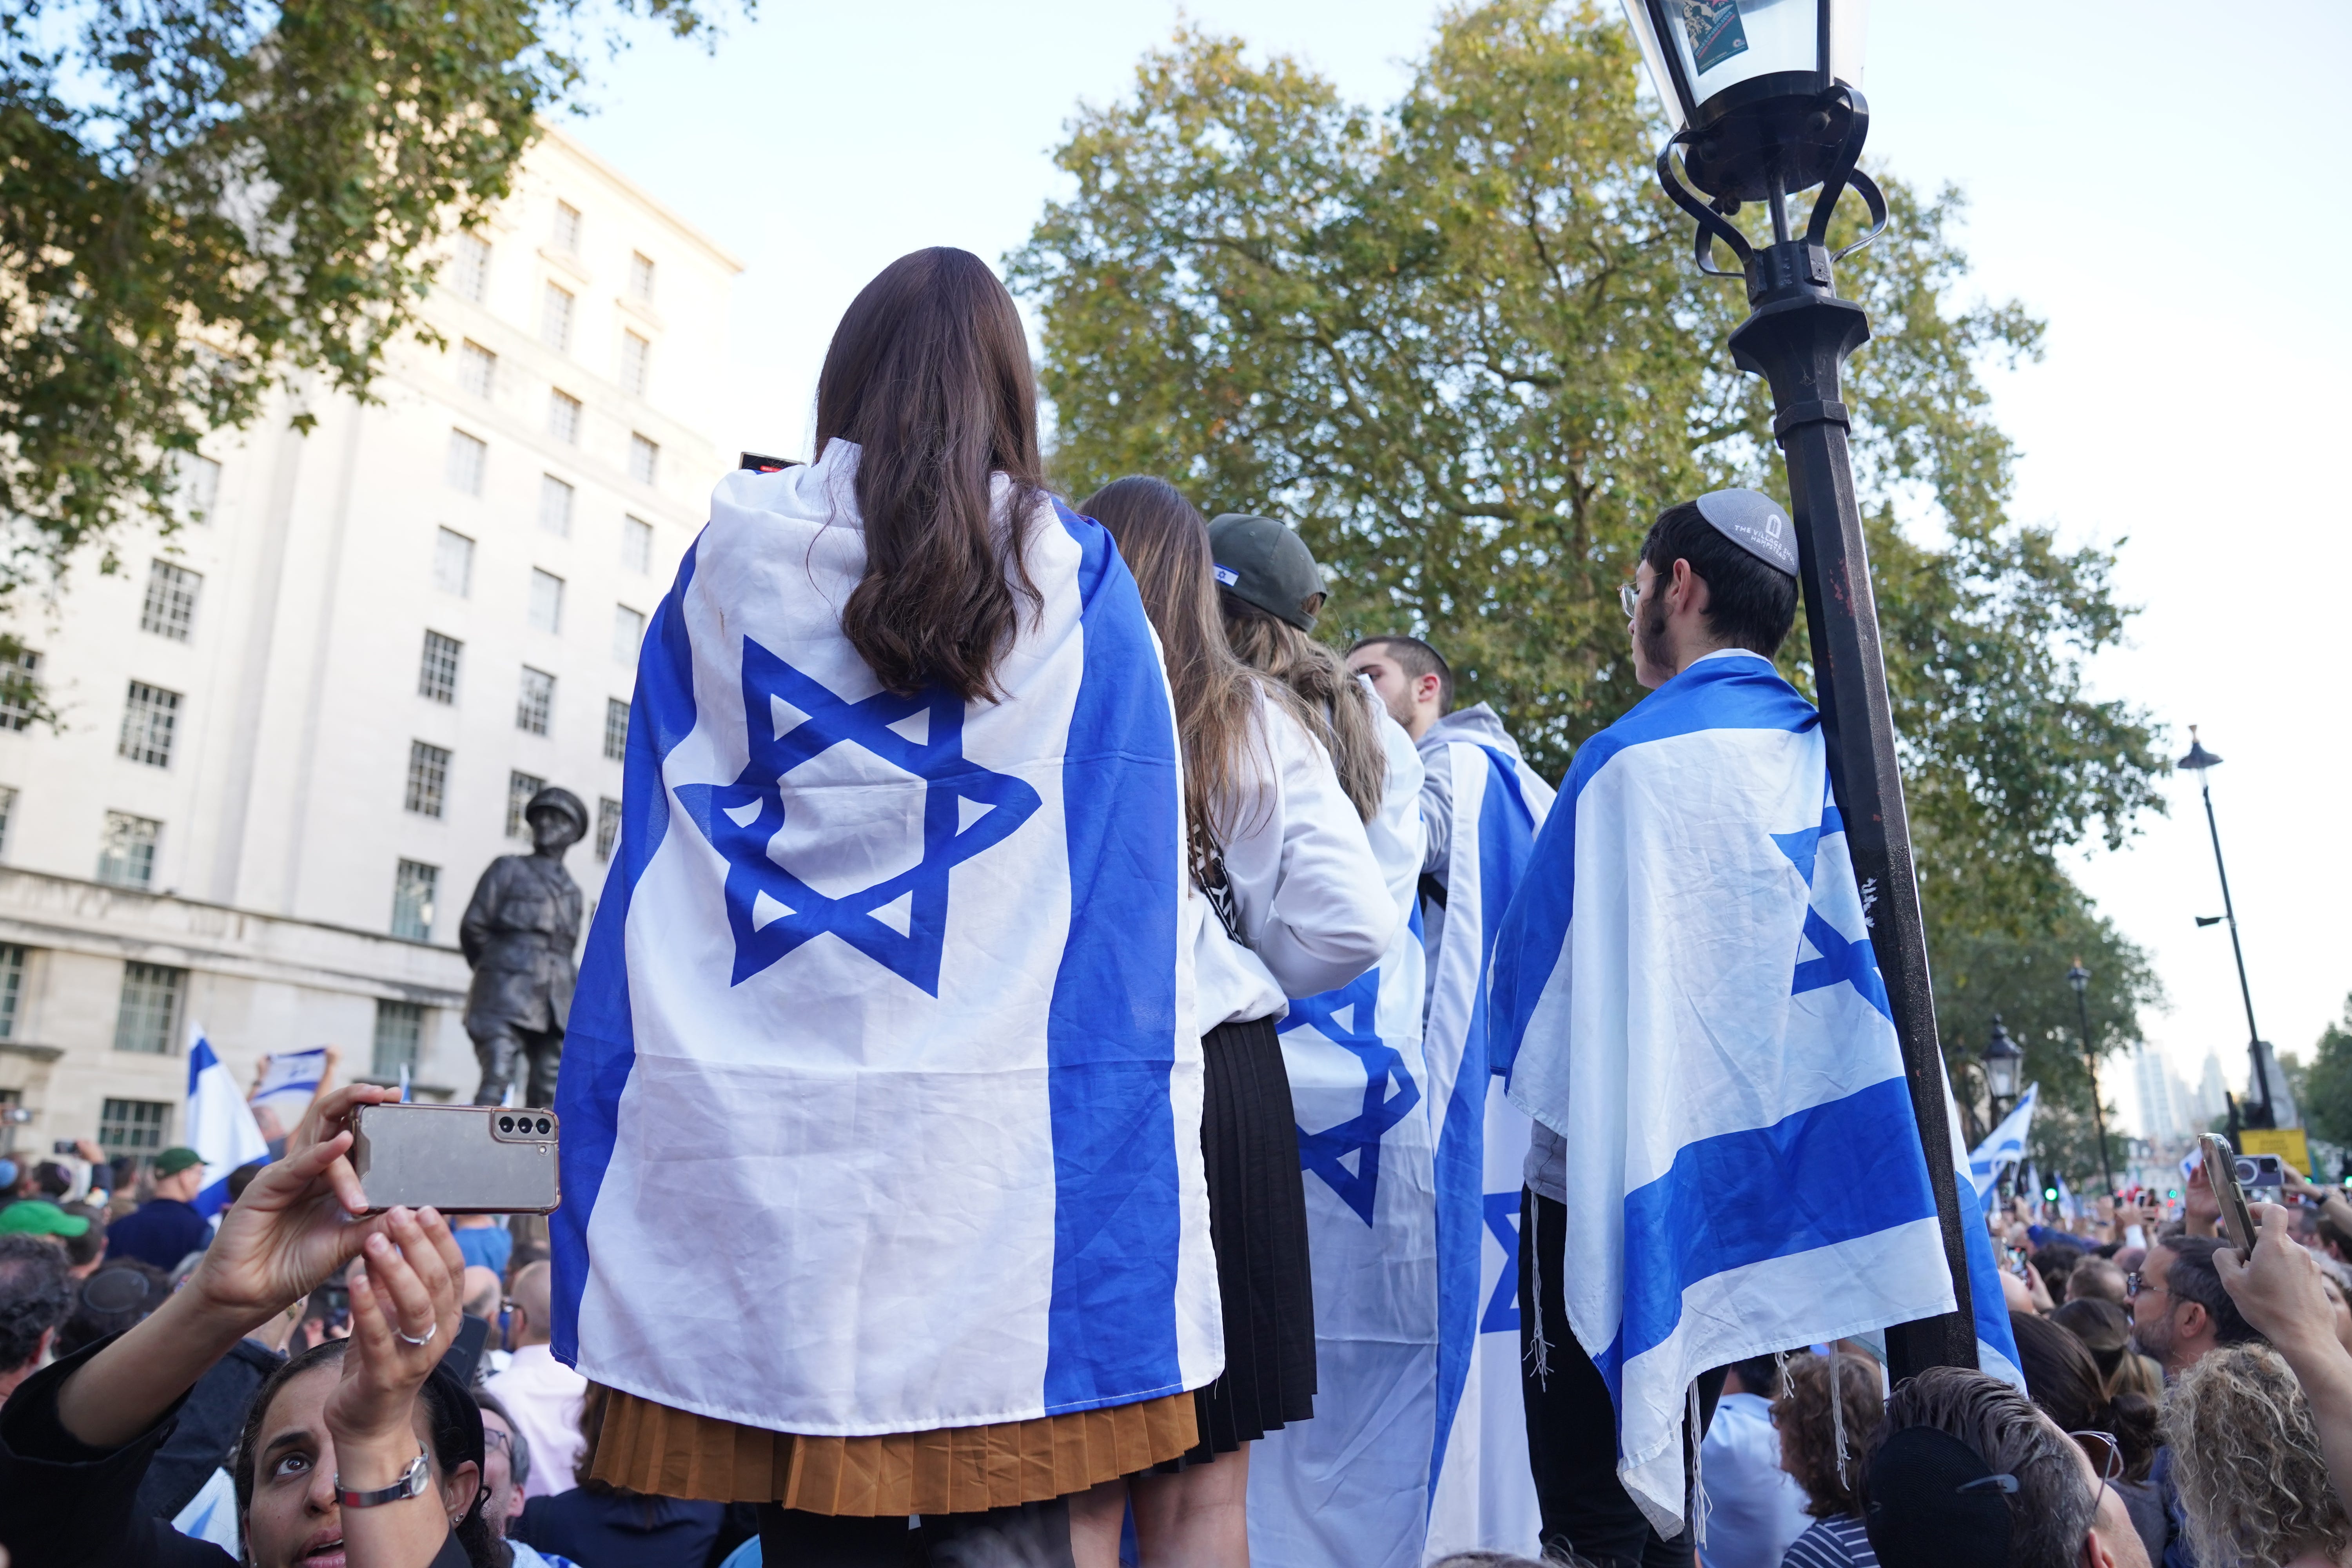 Jewish media outlets unite to combat antisemitism | The Independent